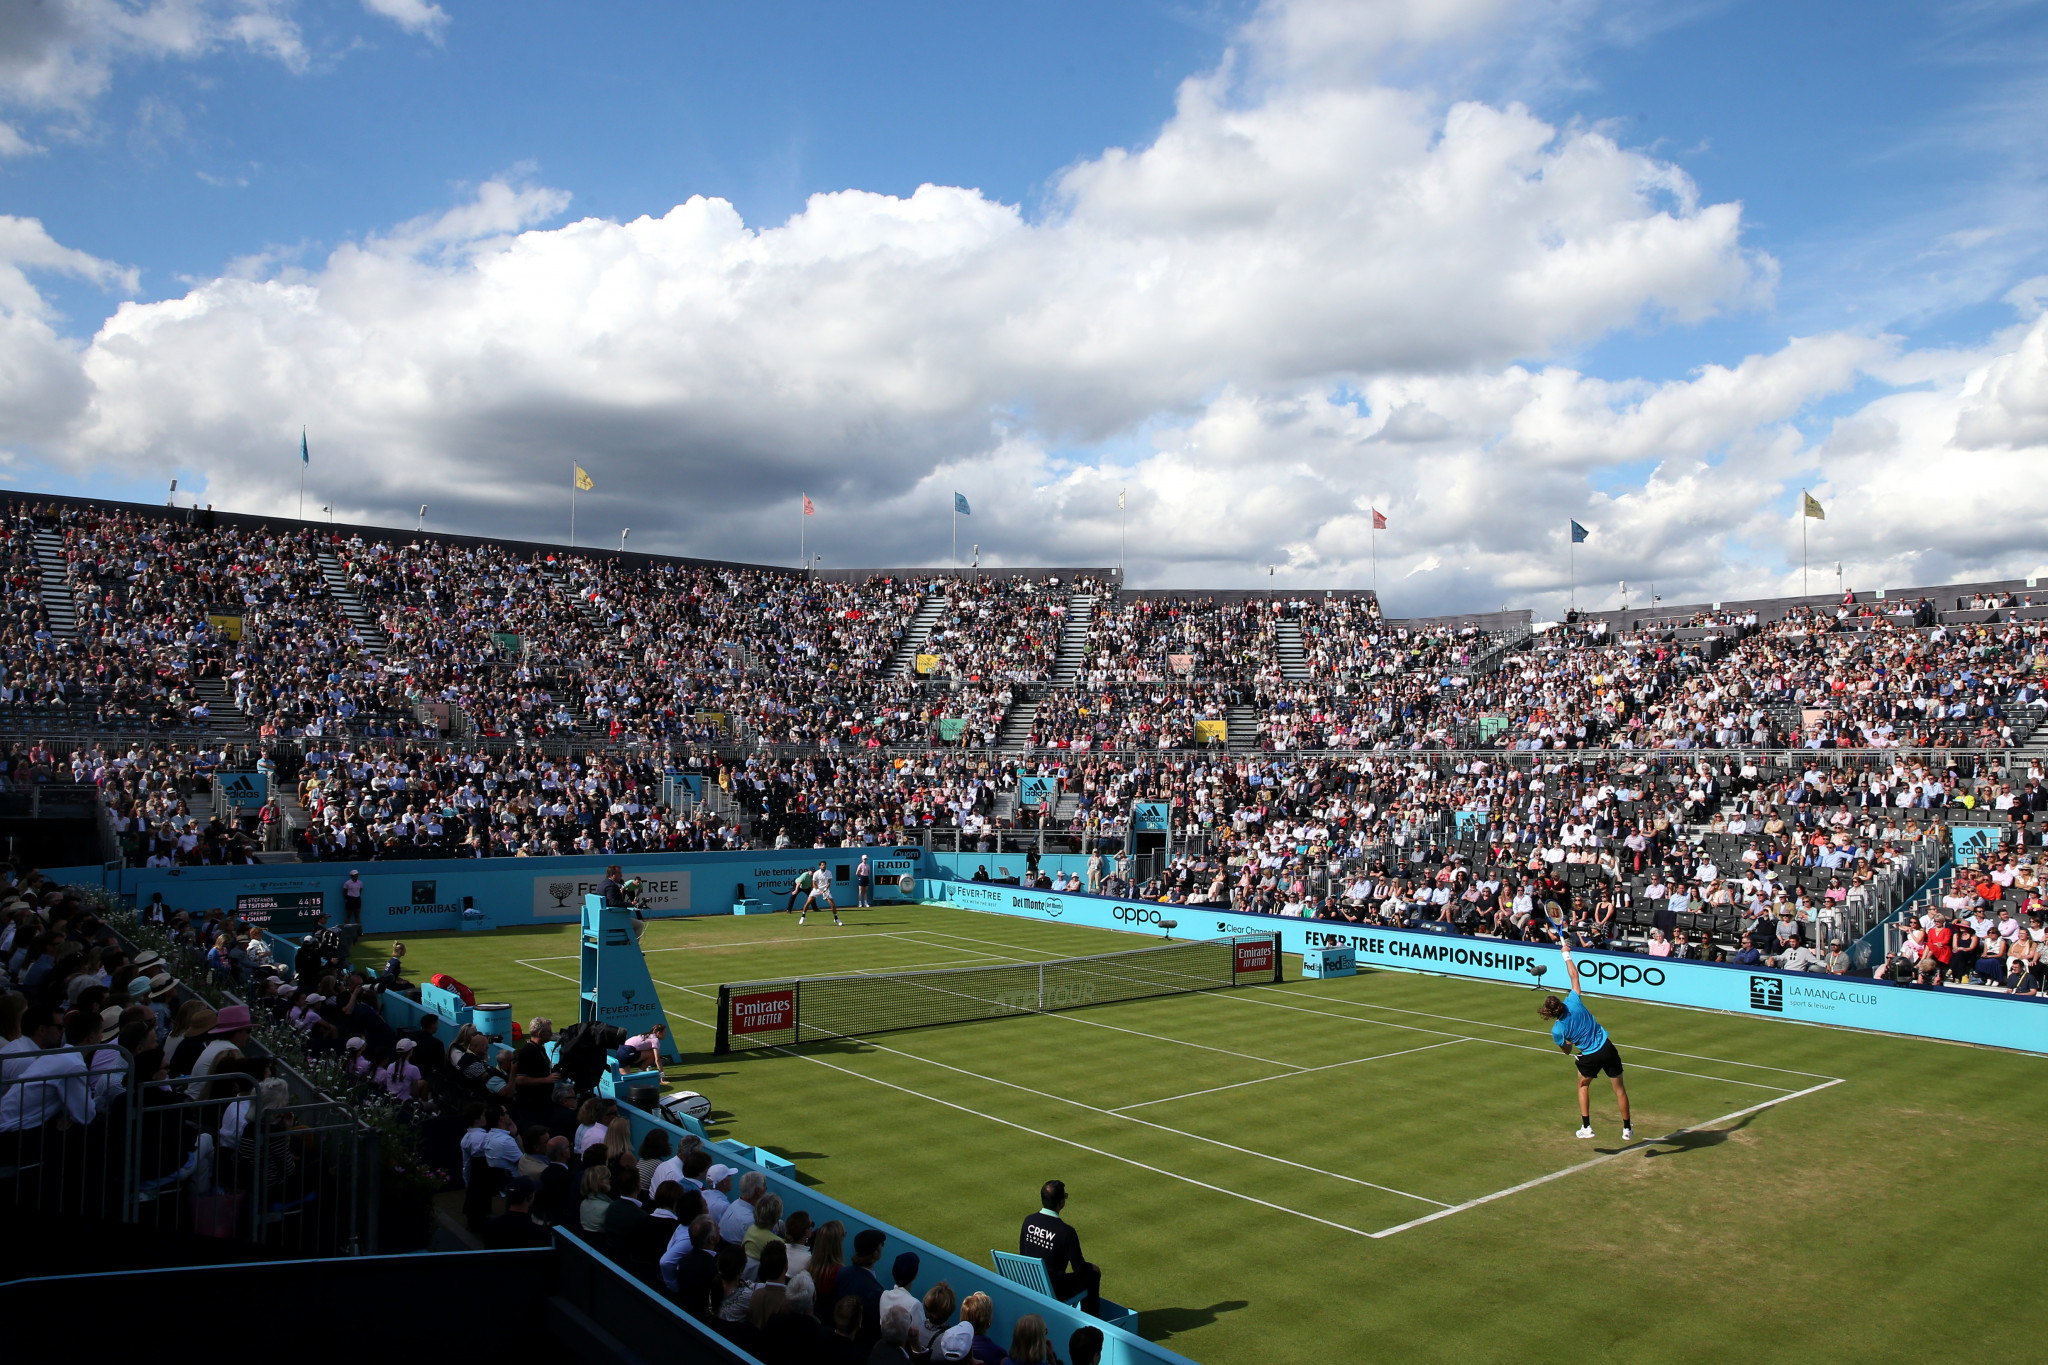 ATP back down from stripping Queen's and Eastbourne of ranking points, but Wimbledon under review